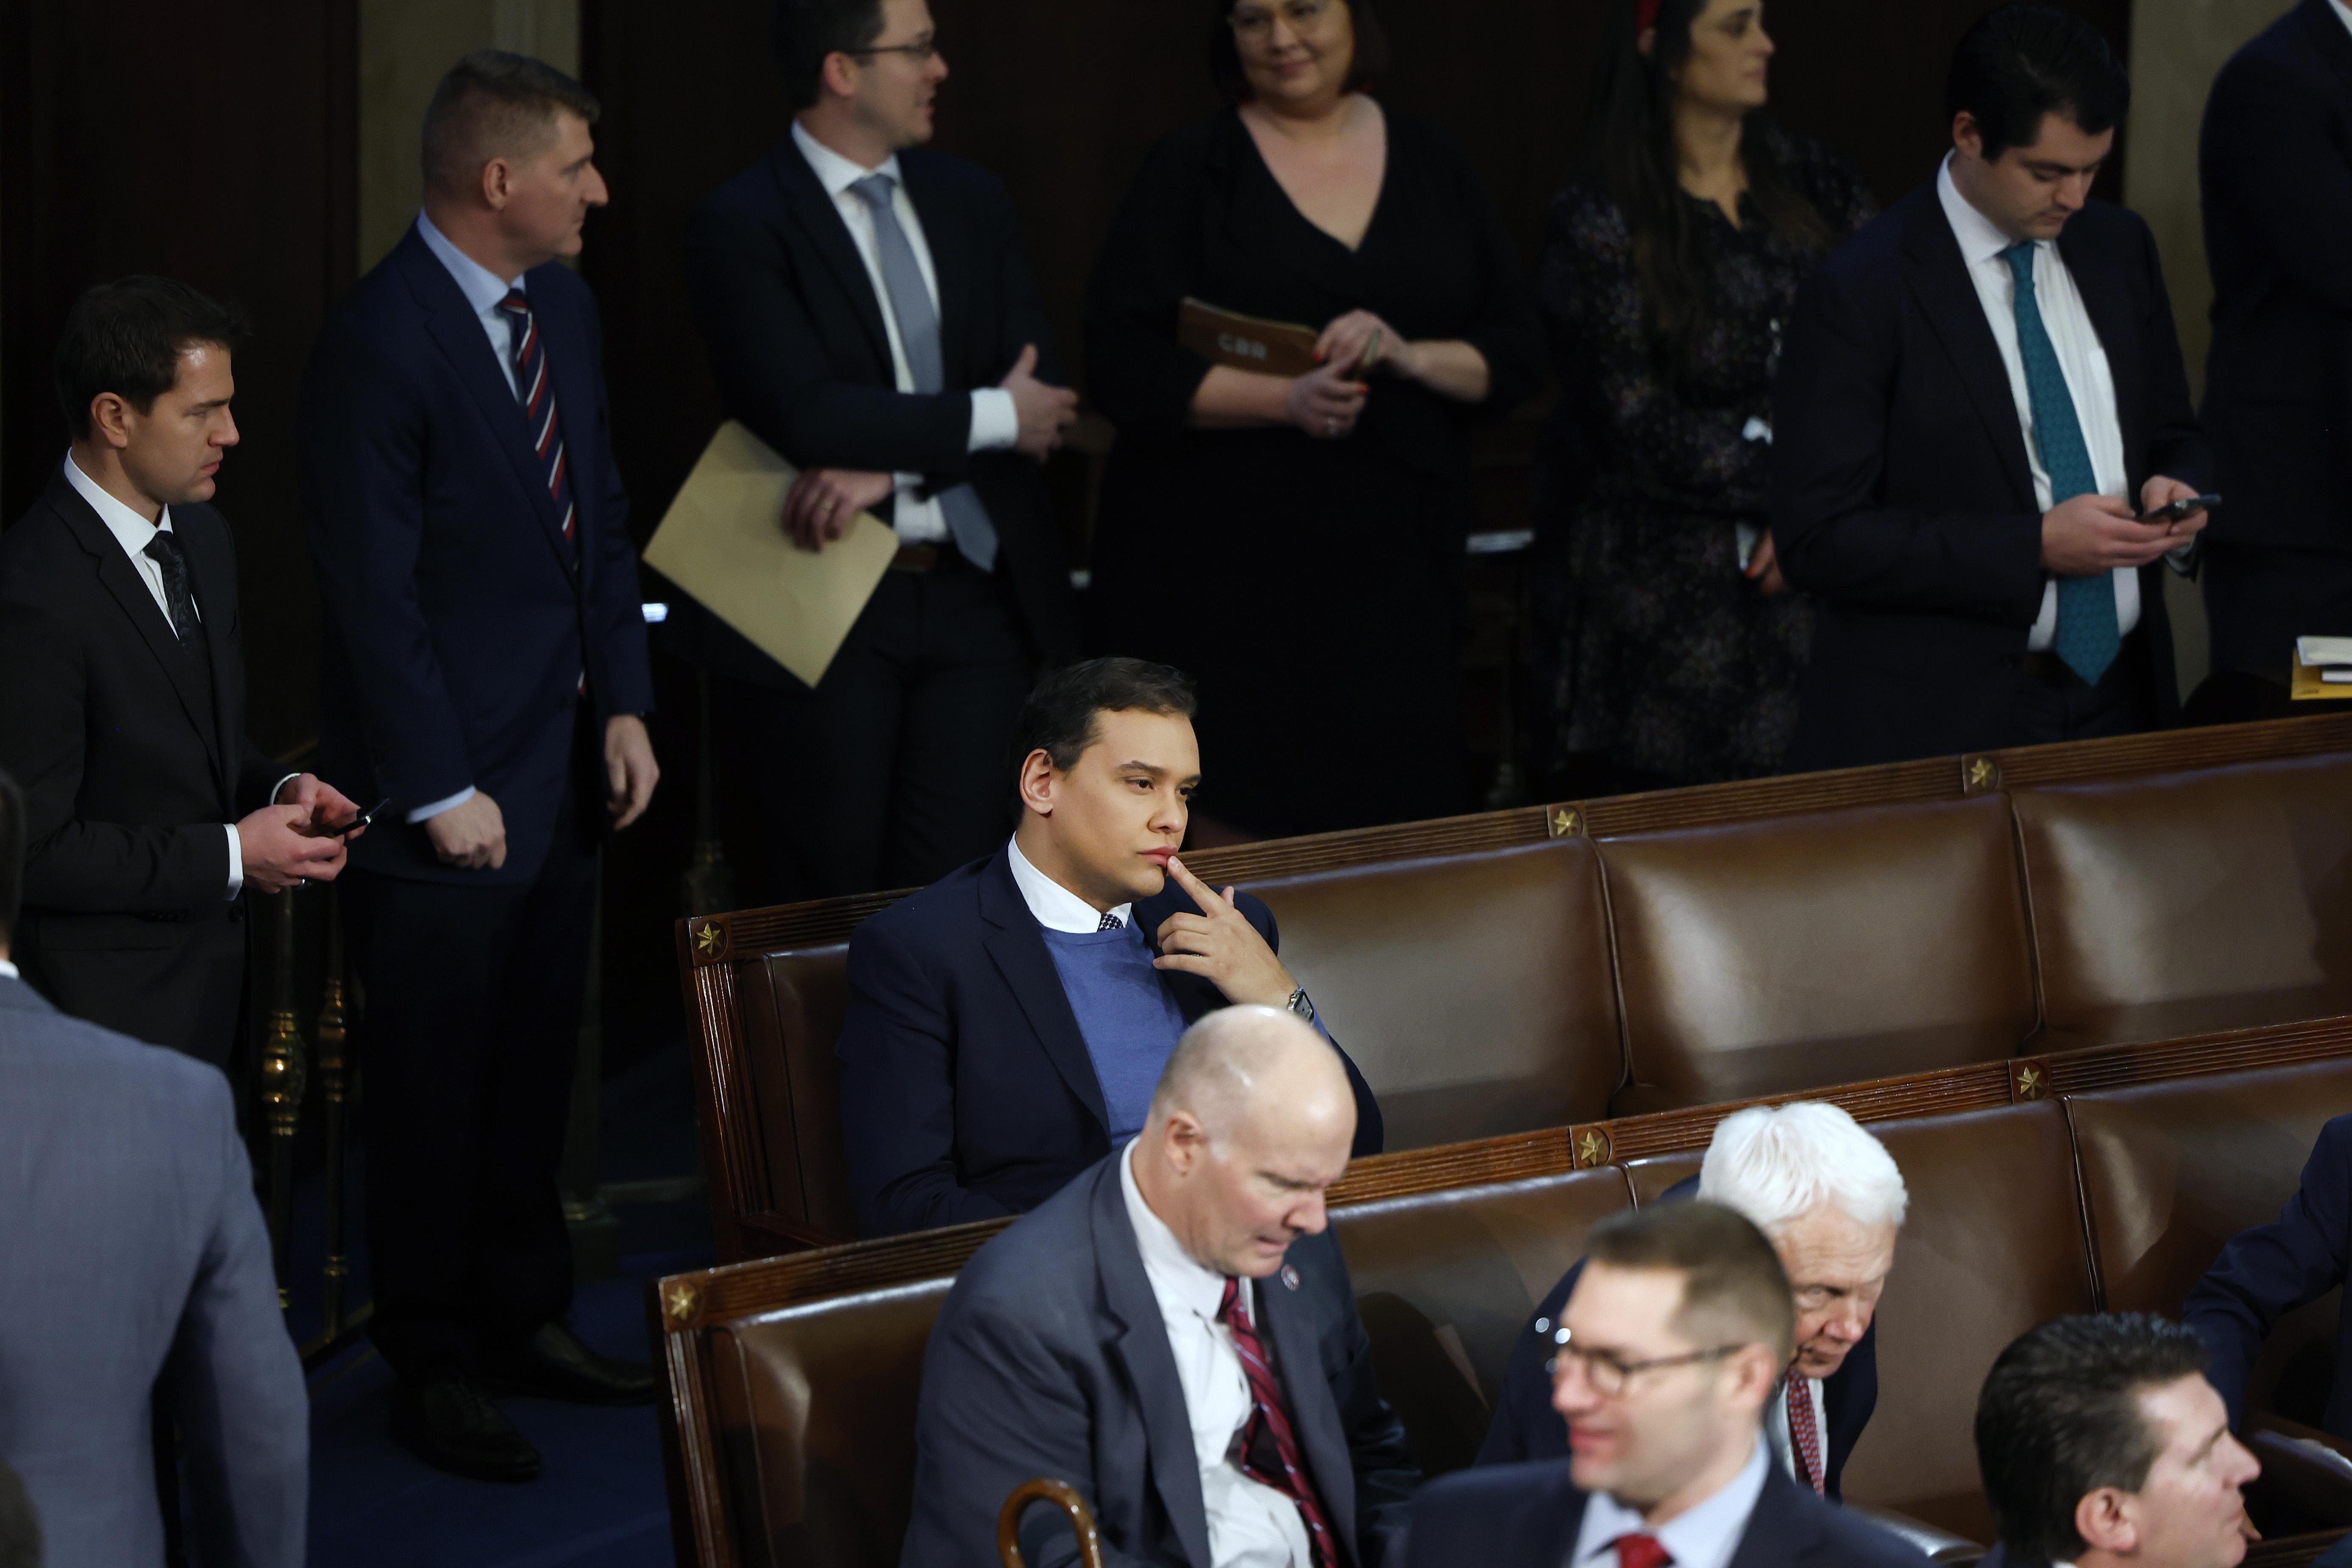 George Santos, an incoming House rep. from New York who lied about nearly every aspect of his background and biography, looking pensive, in the midst of other people shaking hands, in Congress.